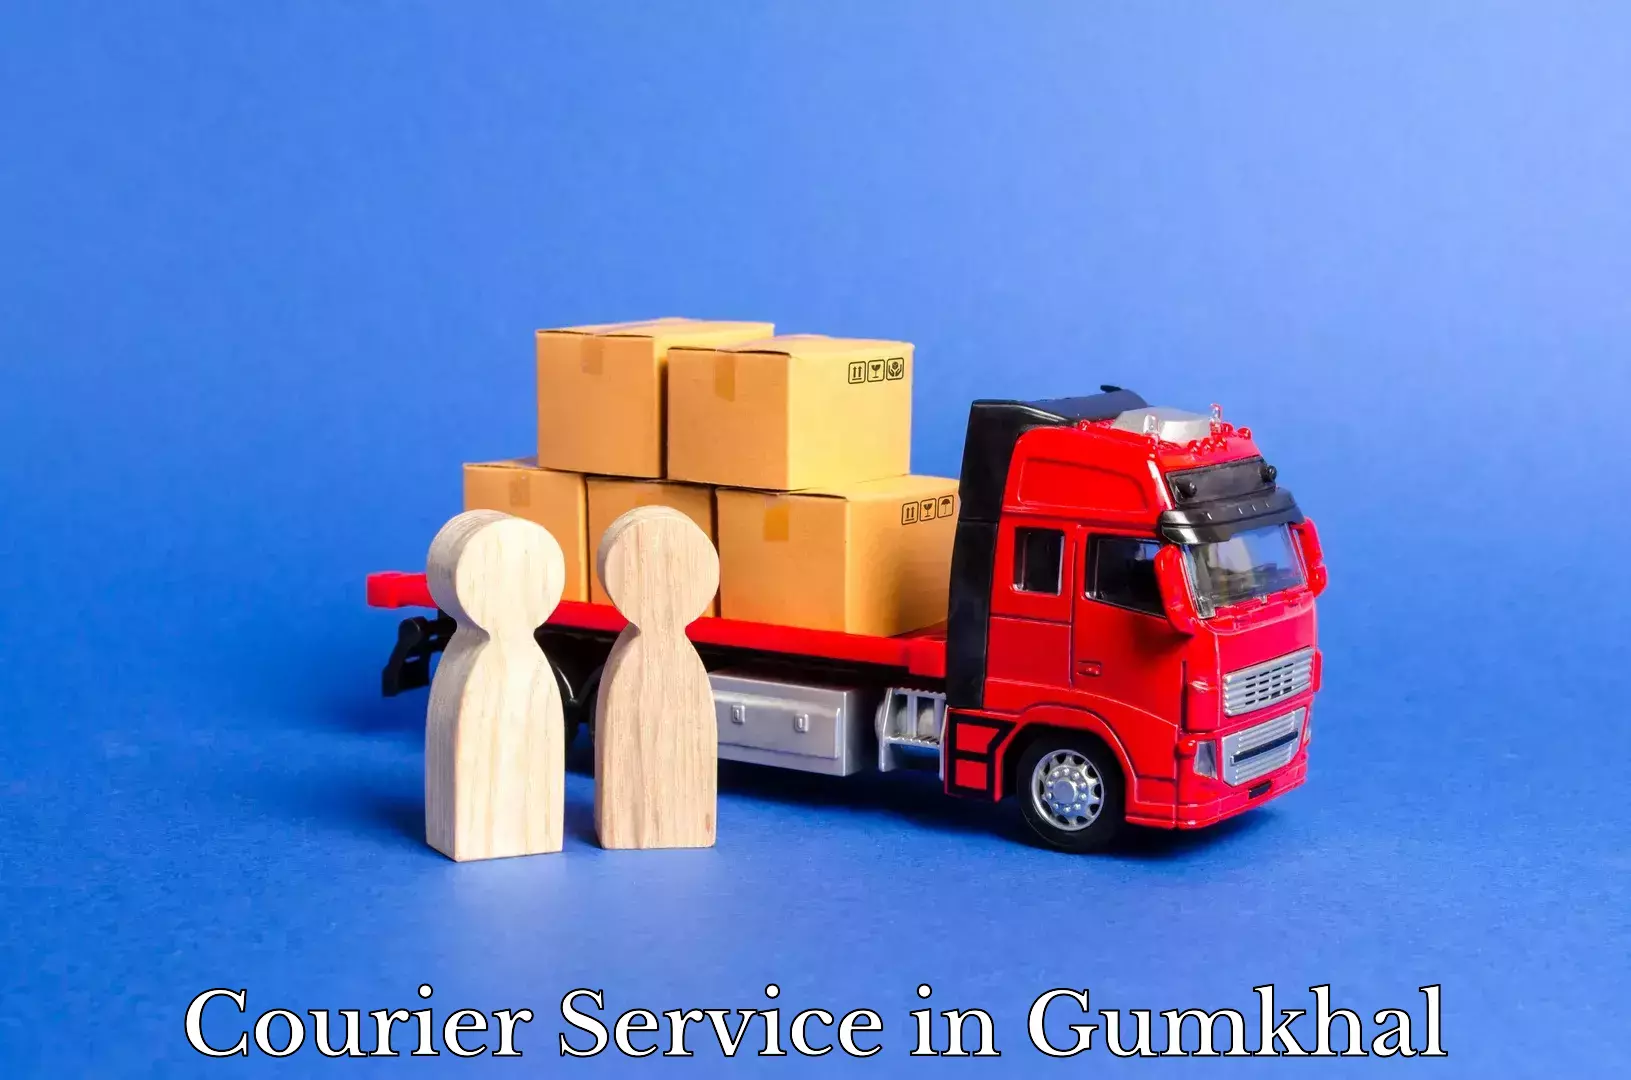 Fast delivery service in Gumkhal